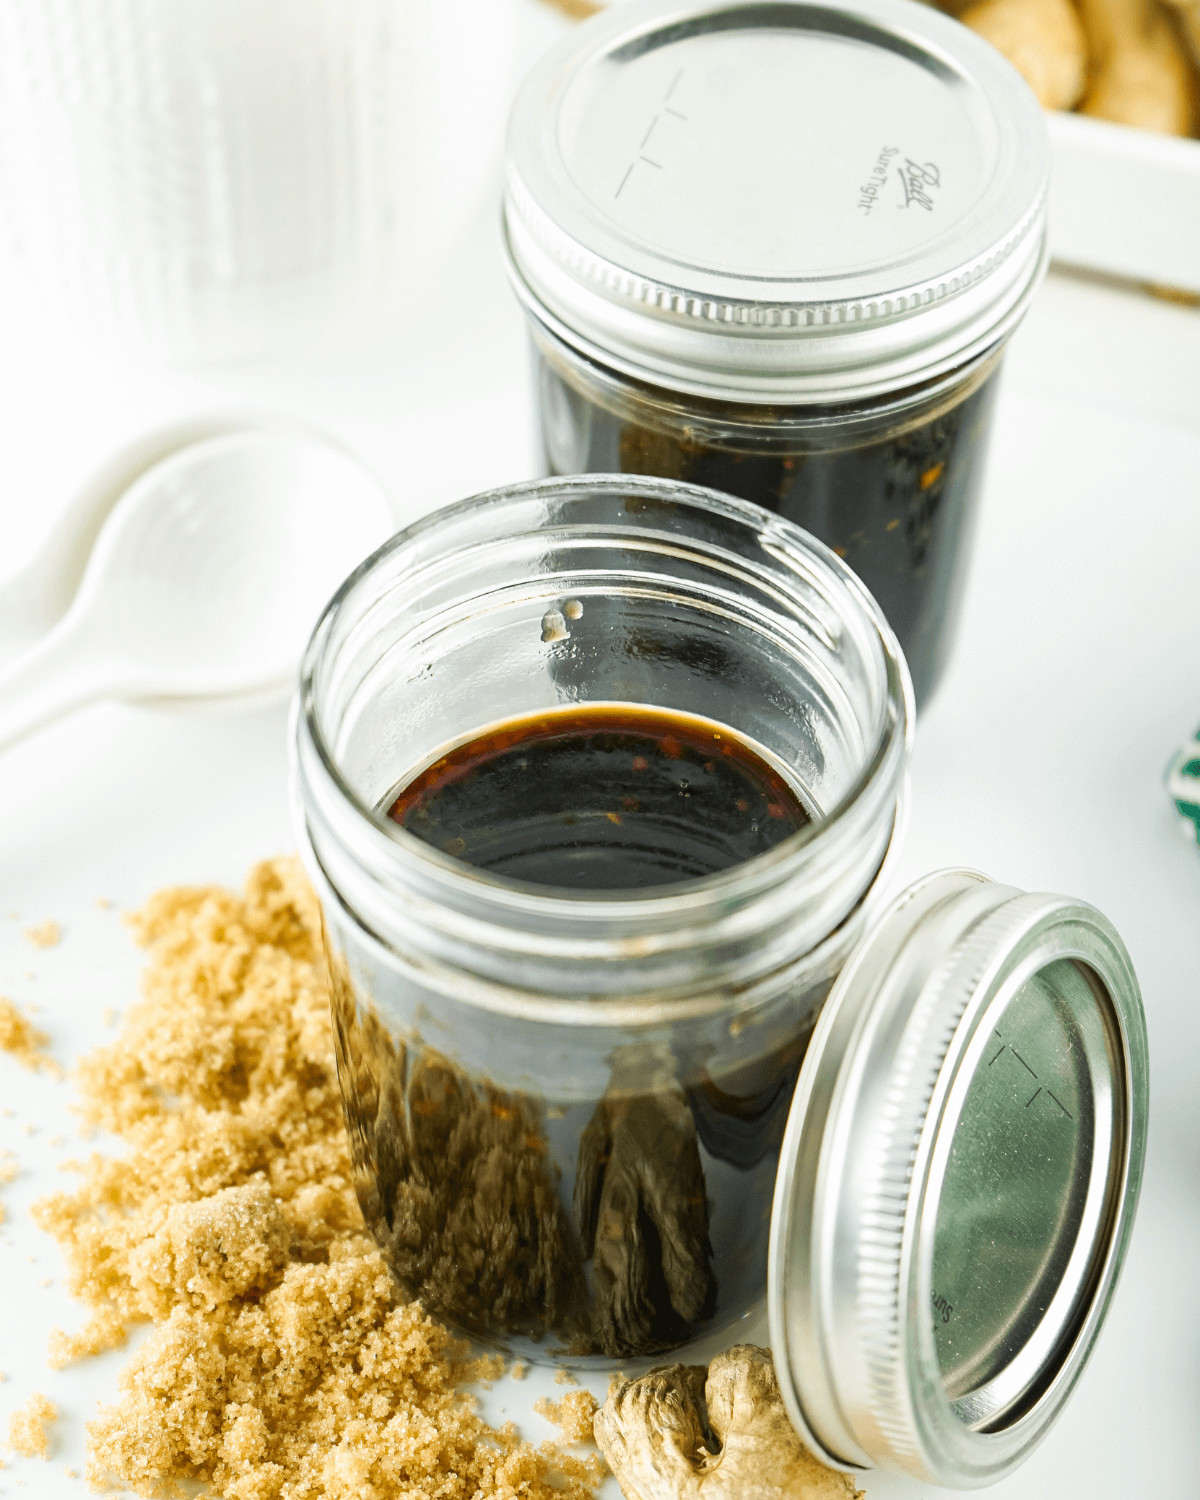 Two jars of homemade honey teriyaki sauce, one open and one closed, on a white surface with brown sugar and ginger scattered around.